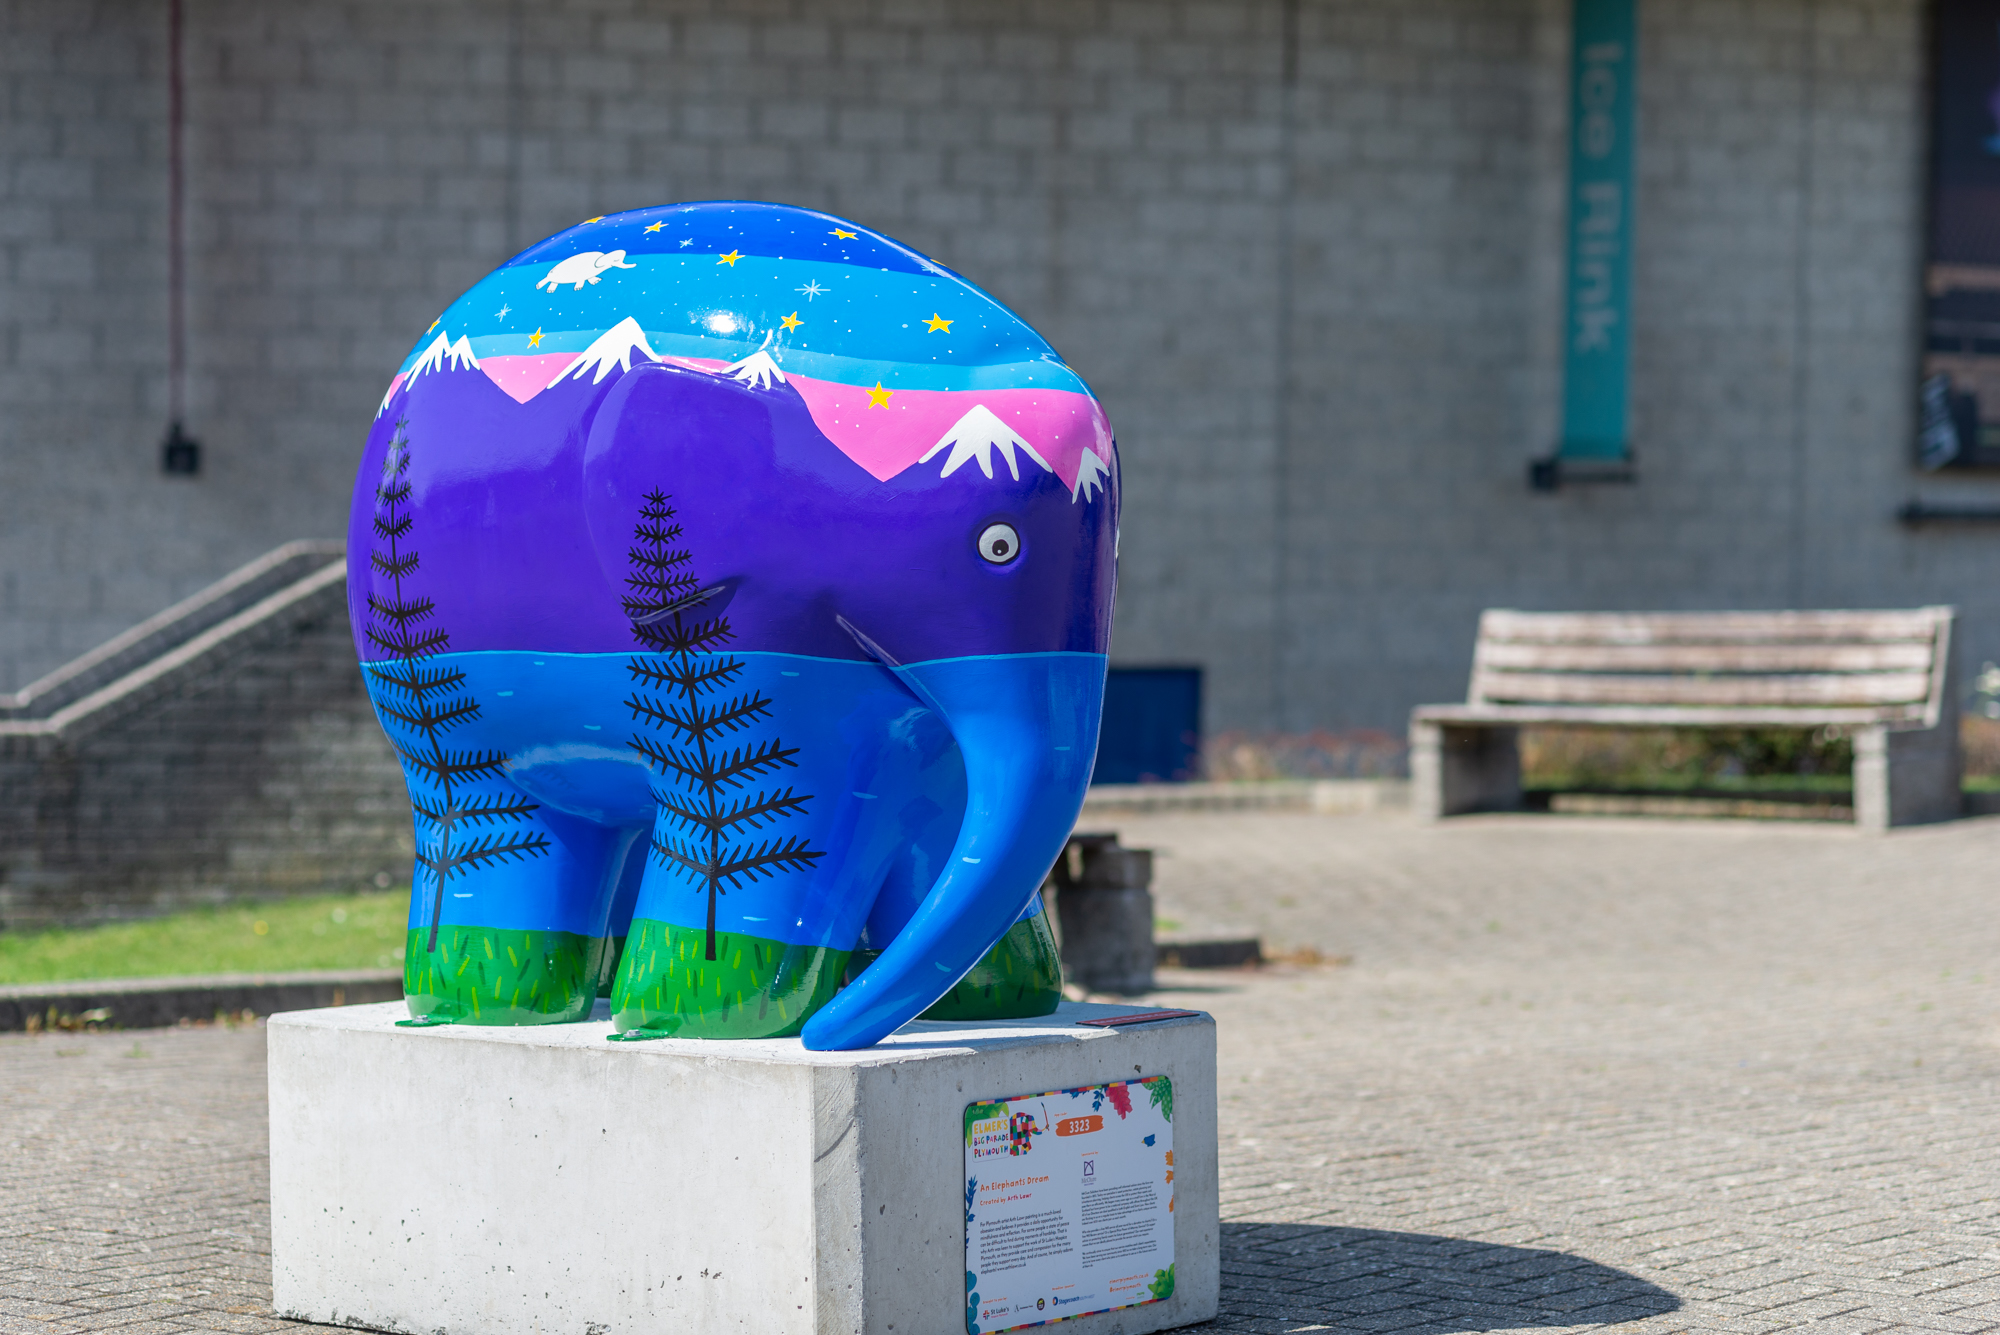 'An Elephant's Dream' by Arth Law. Sponsored by McClure Solicitors - Image 5 of 10